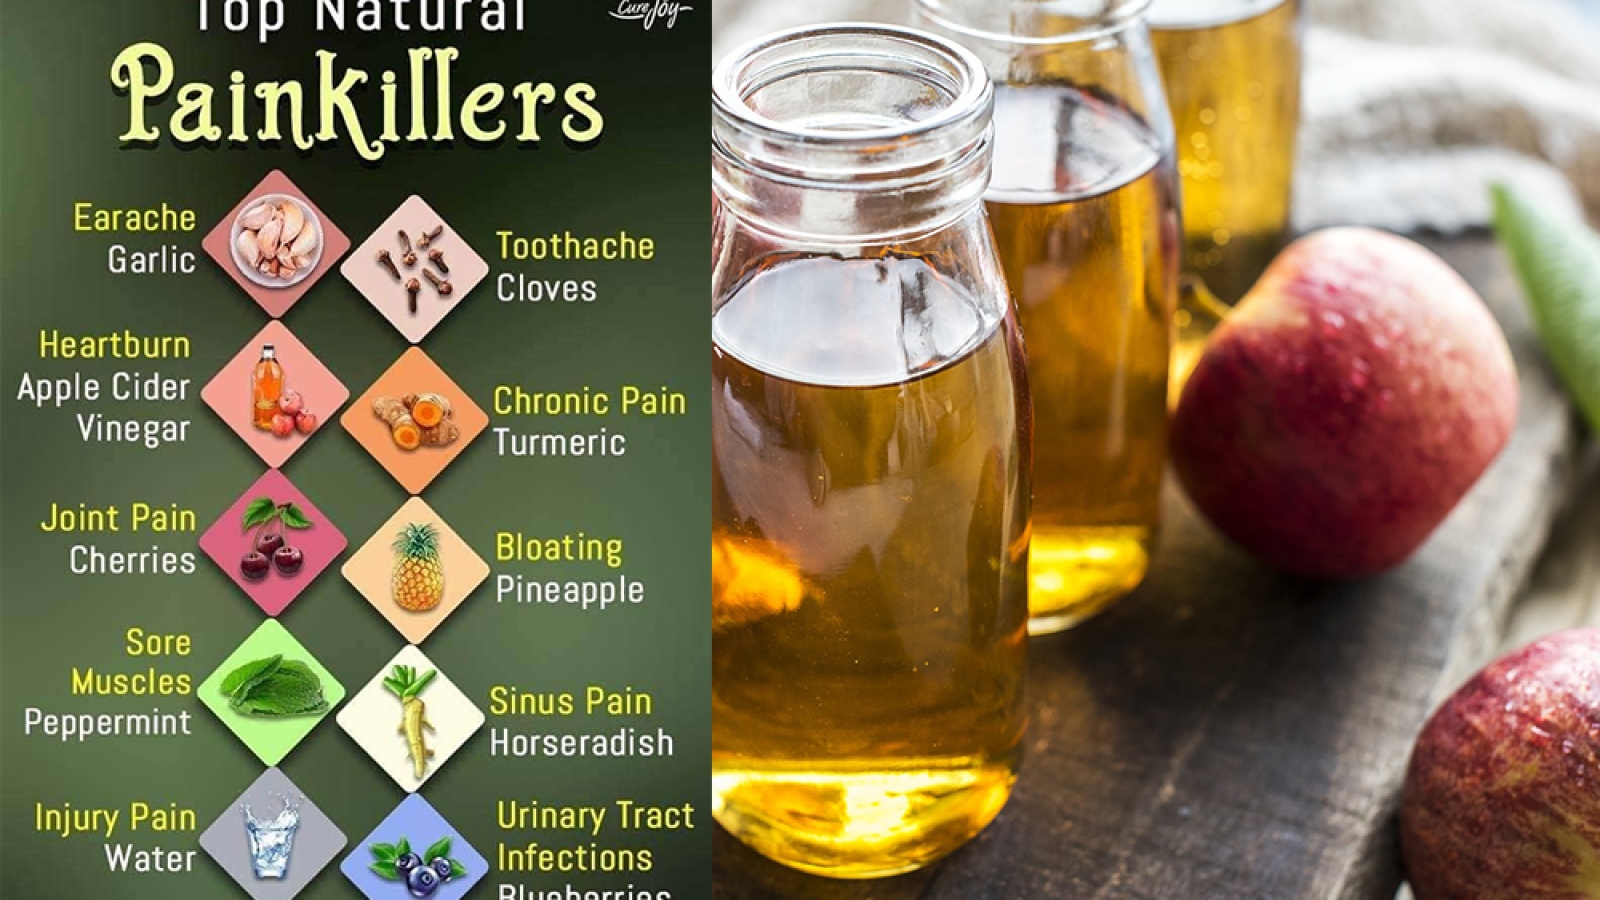 Top-Natural-Painkillers1